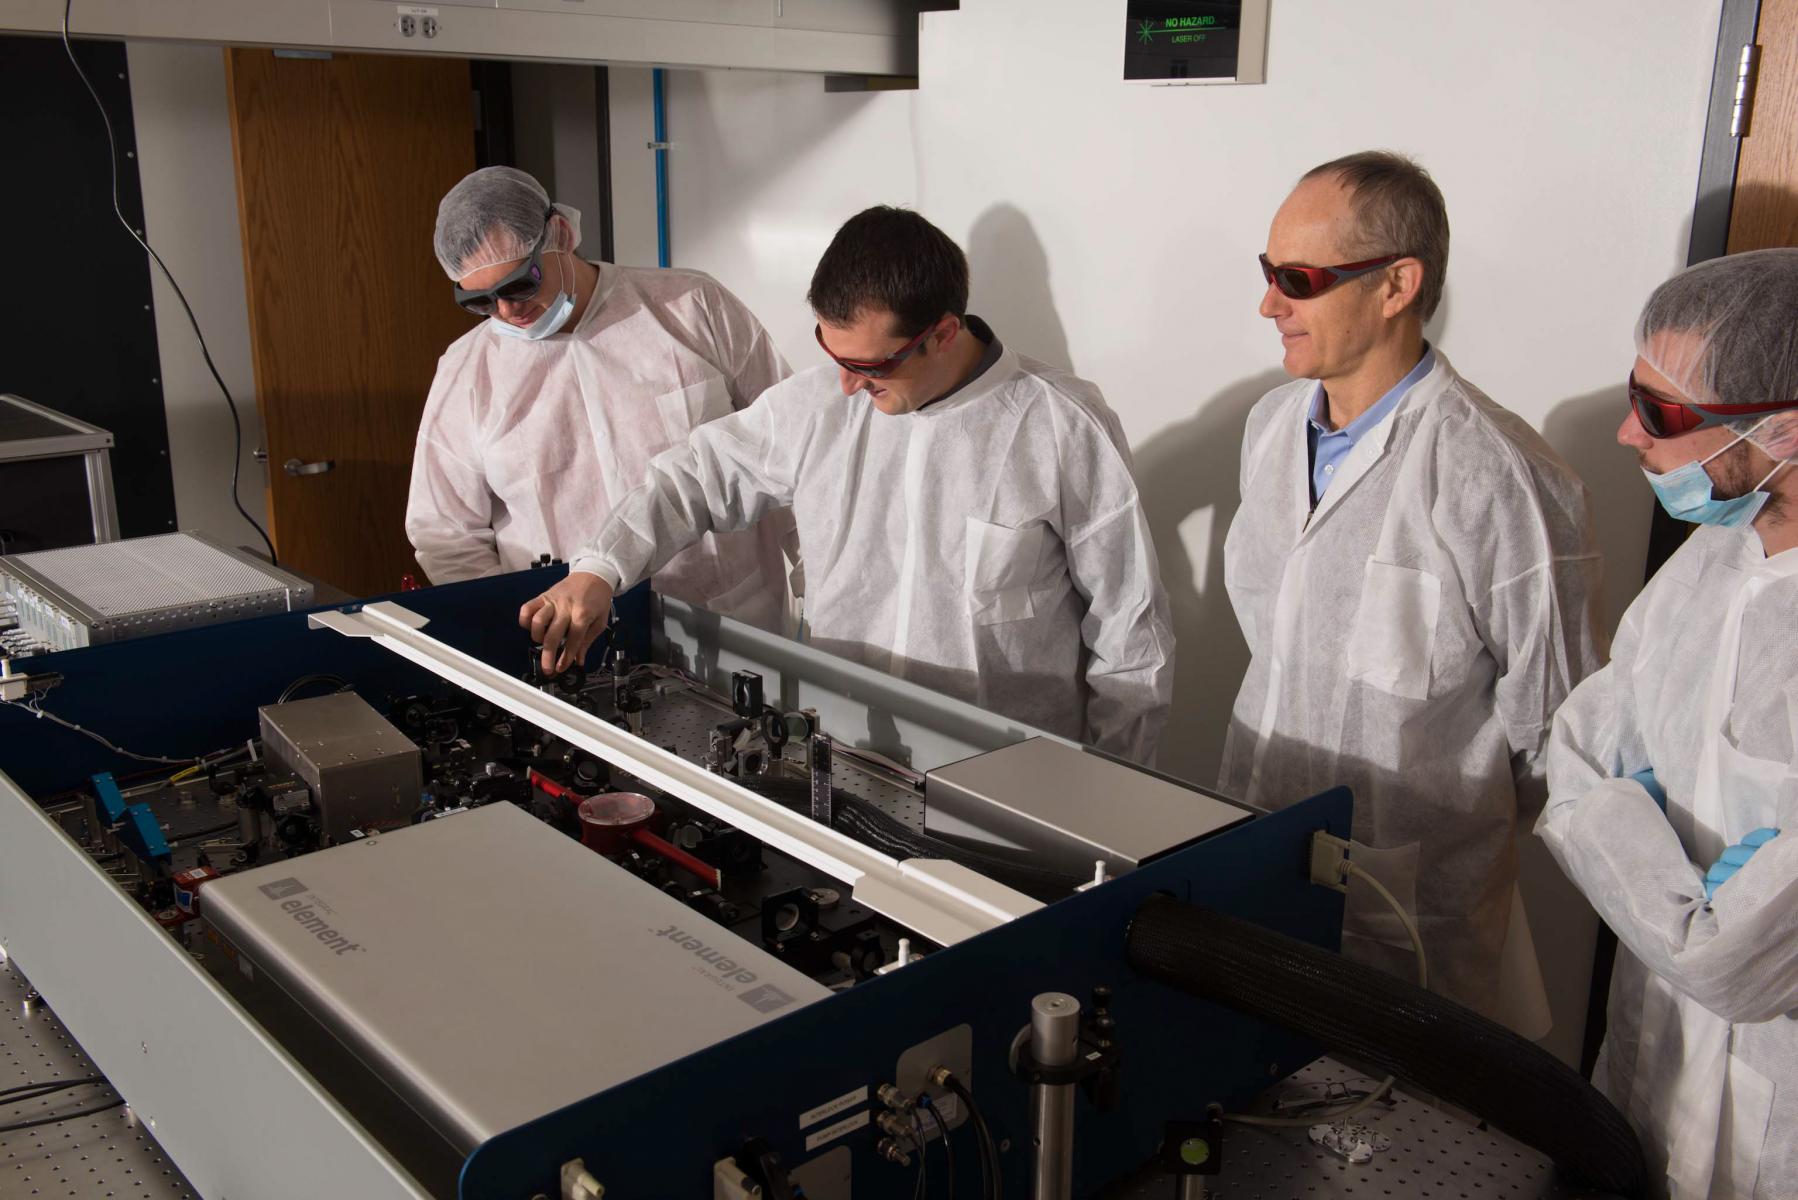 Nebraska laser lab generates light that's 'out of this world'